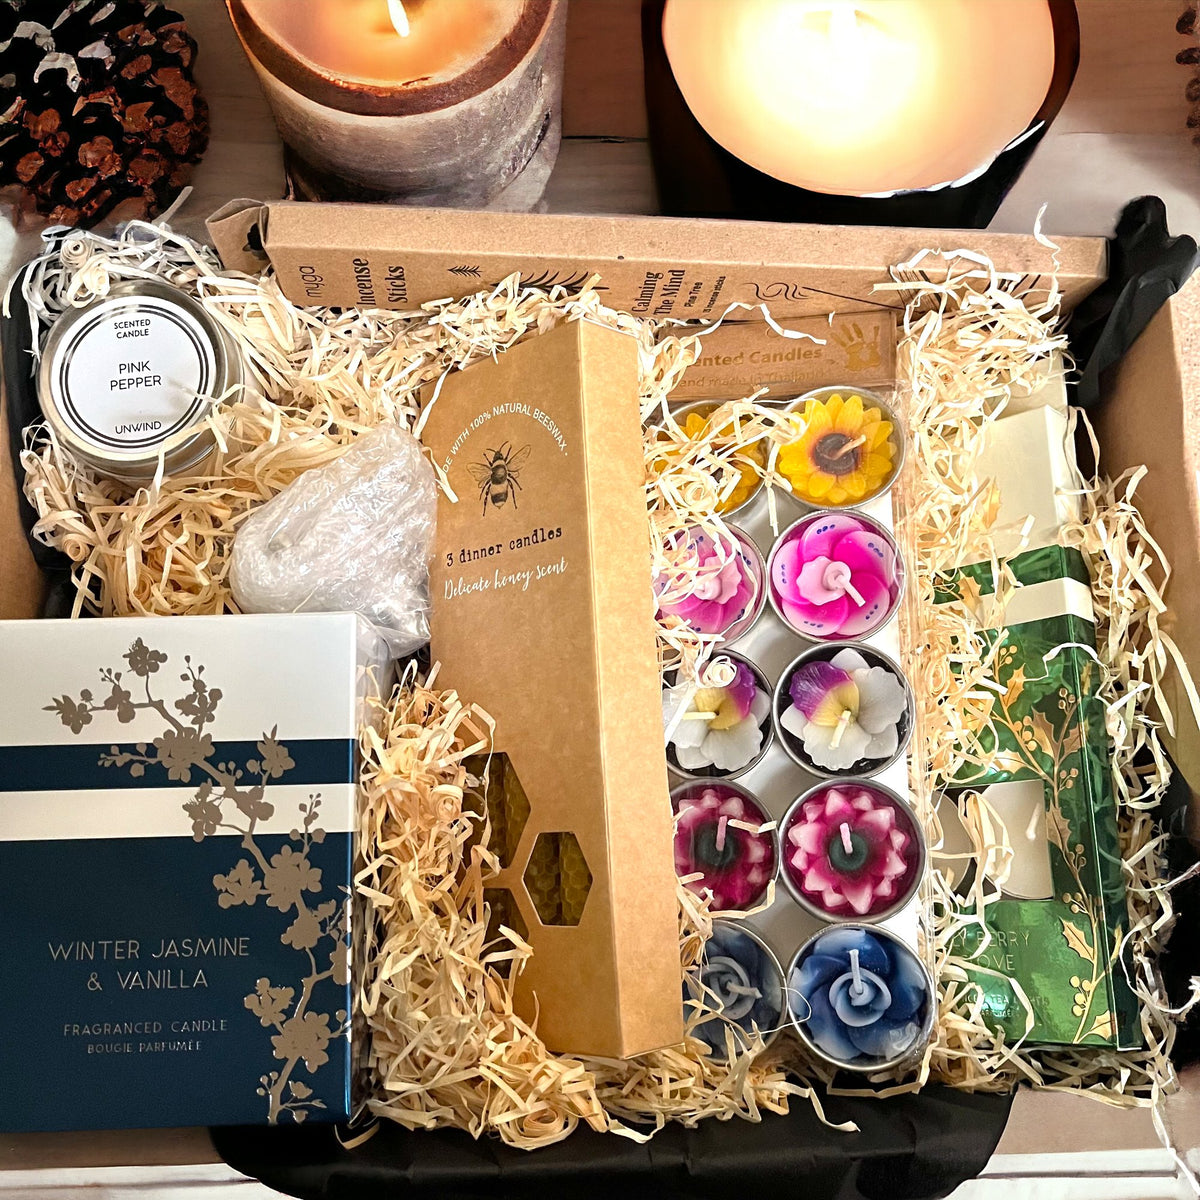 Monthly Scented Candle Subscription Box - Cherish Home